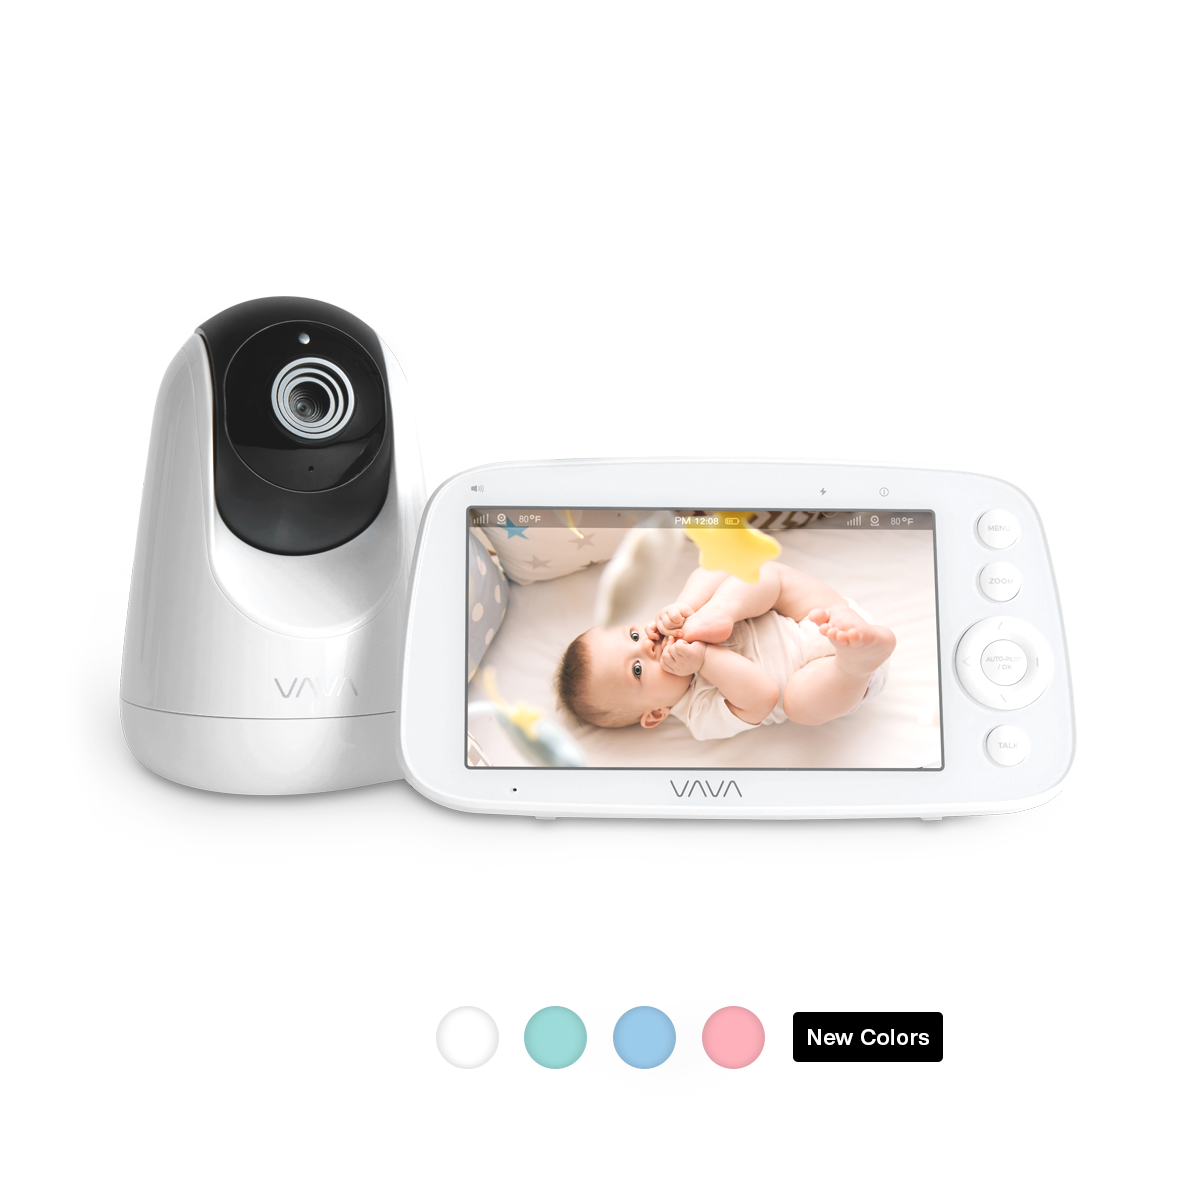 Add-On Camera for Video Baby Monitor HD S2